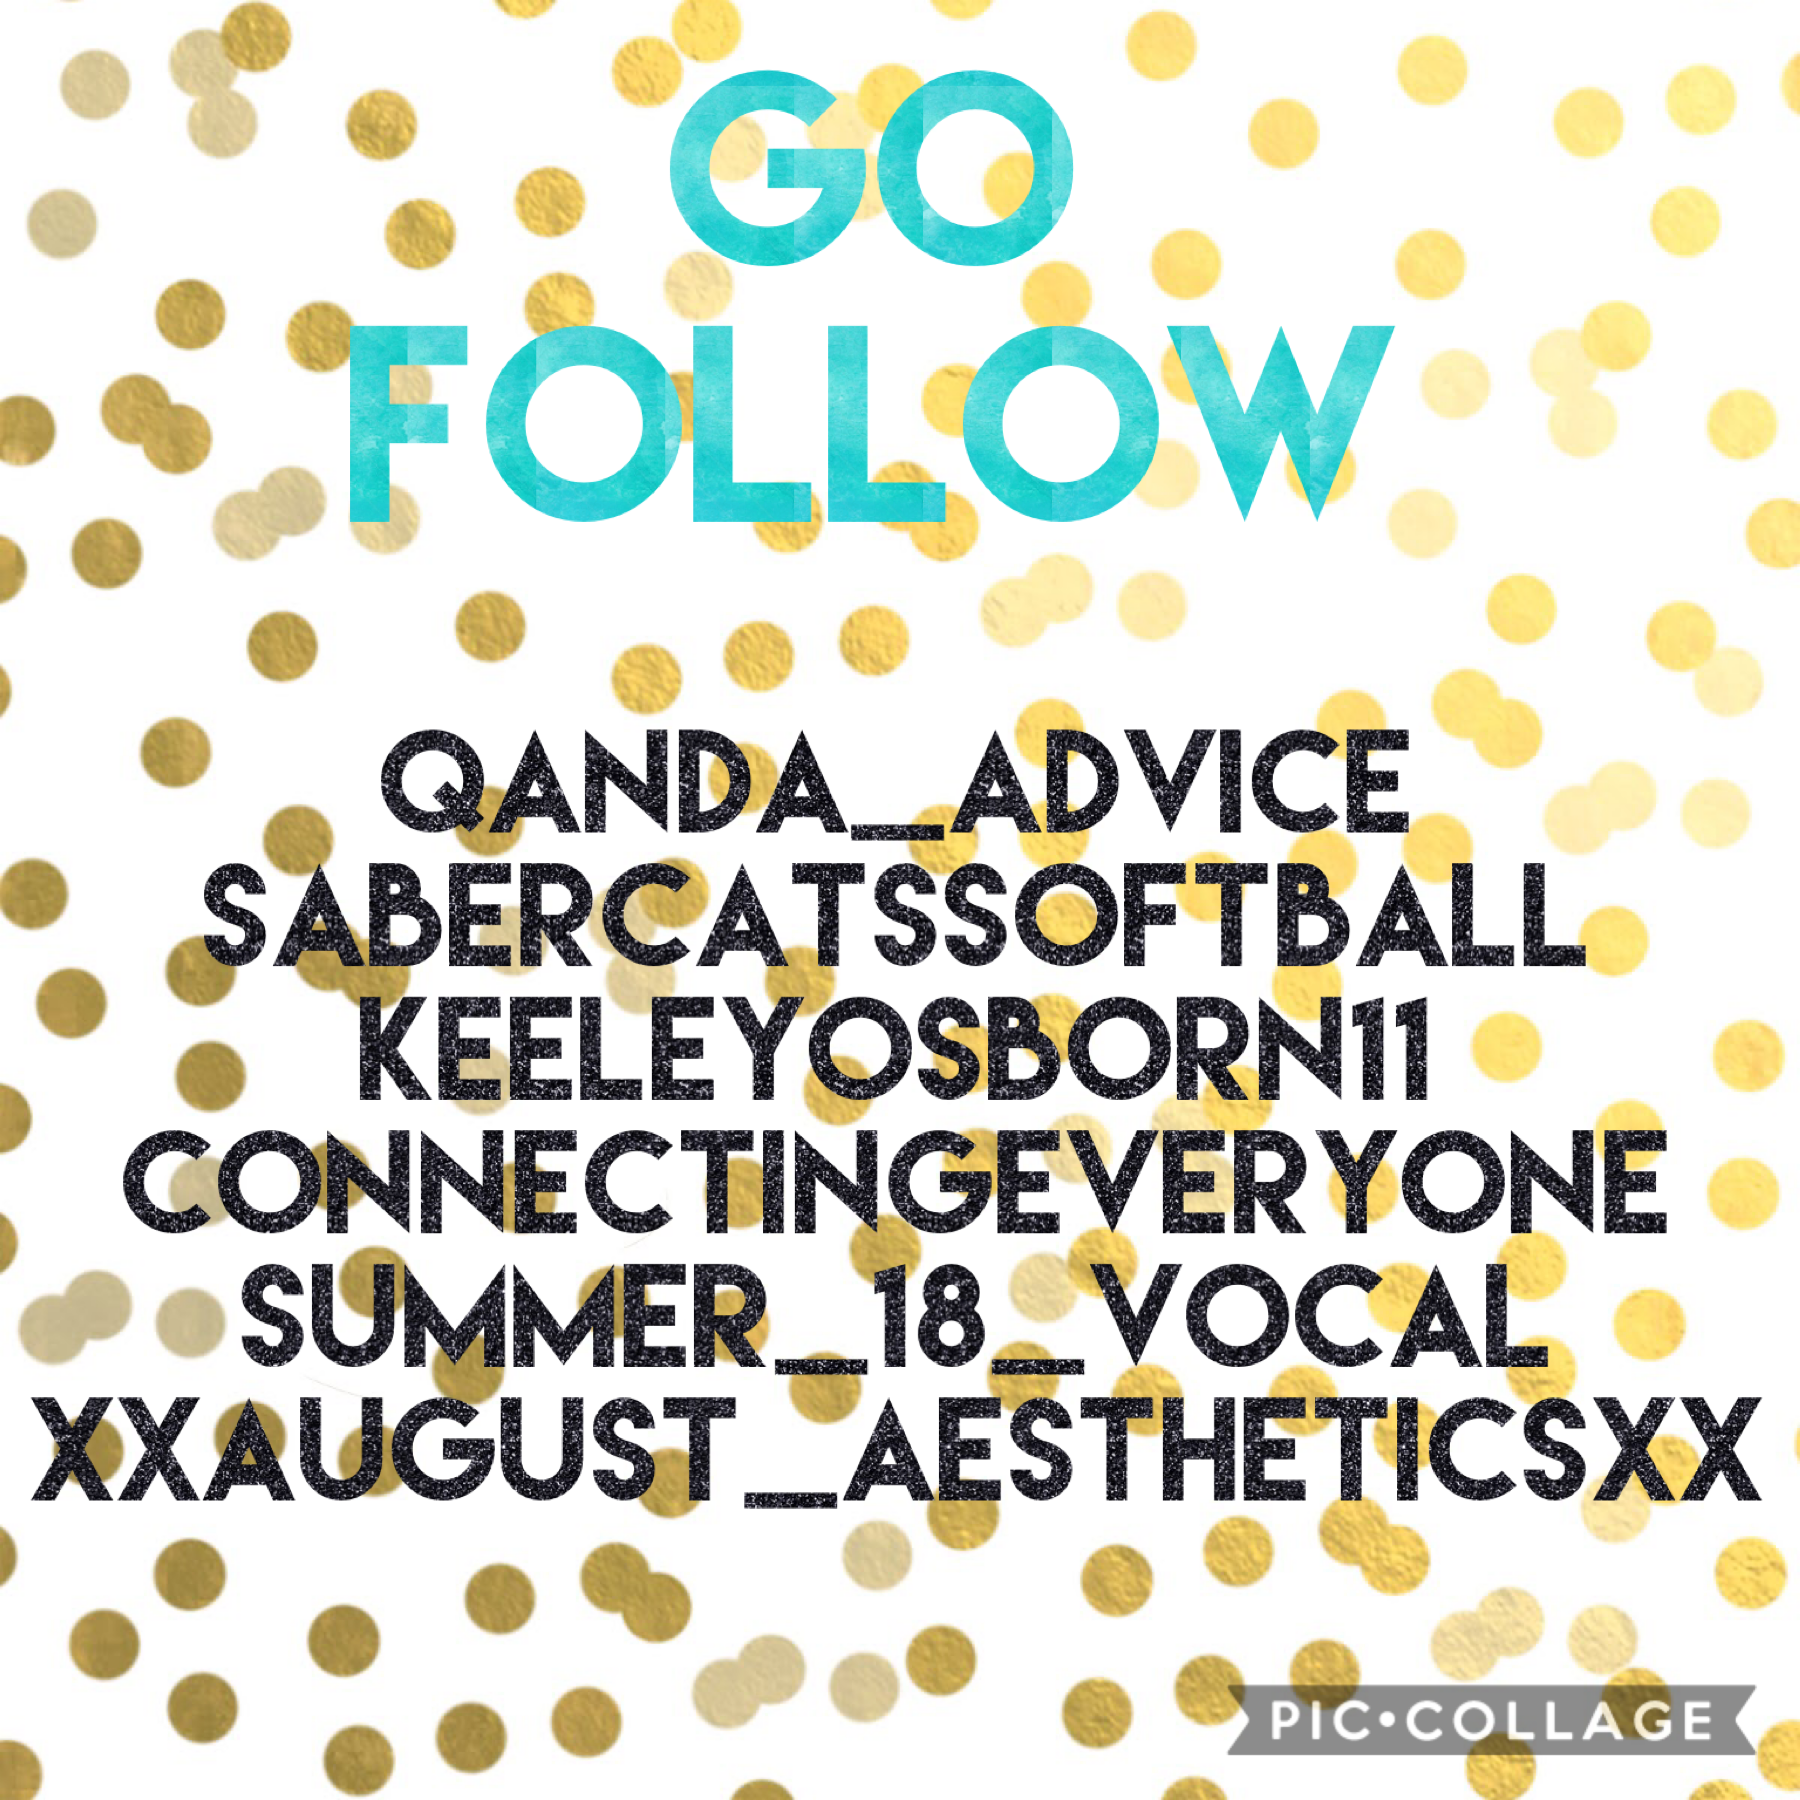 Please go follow these people